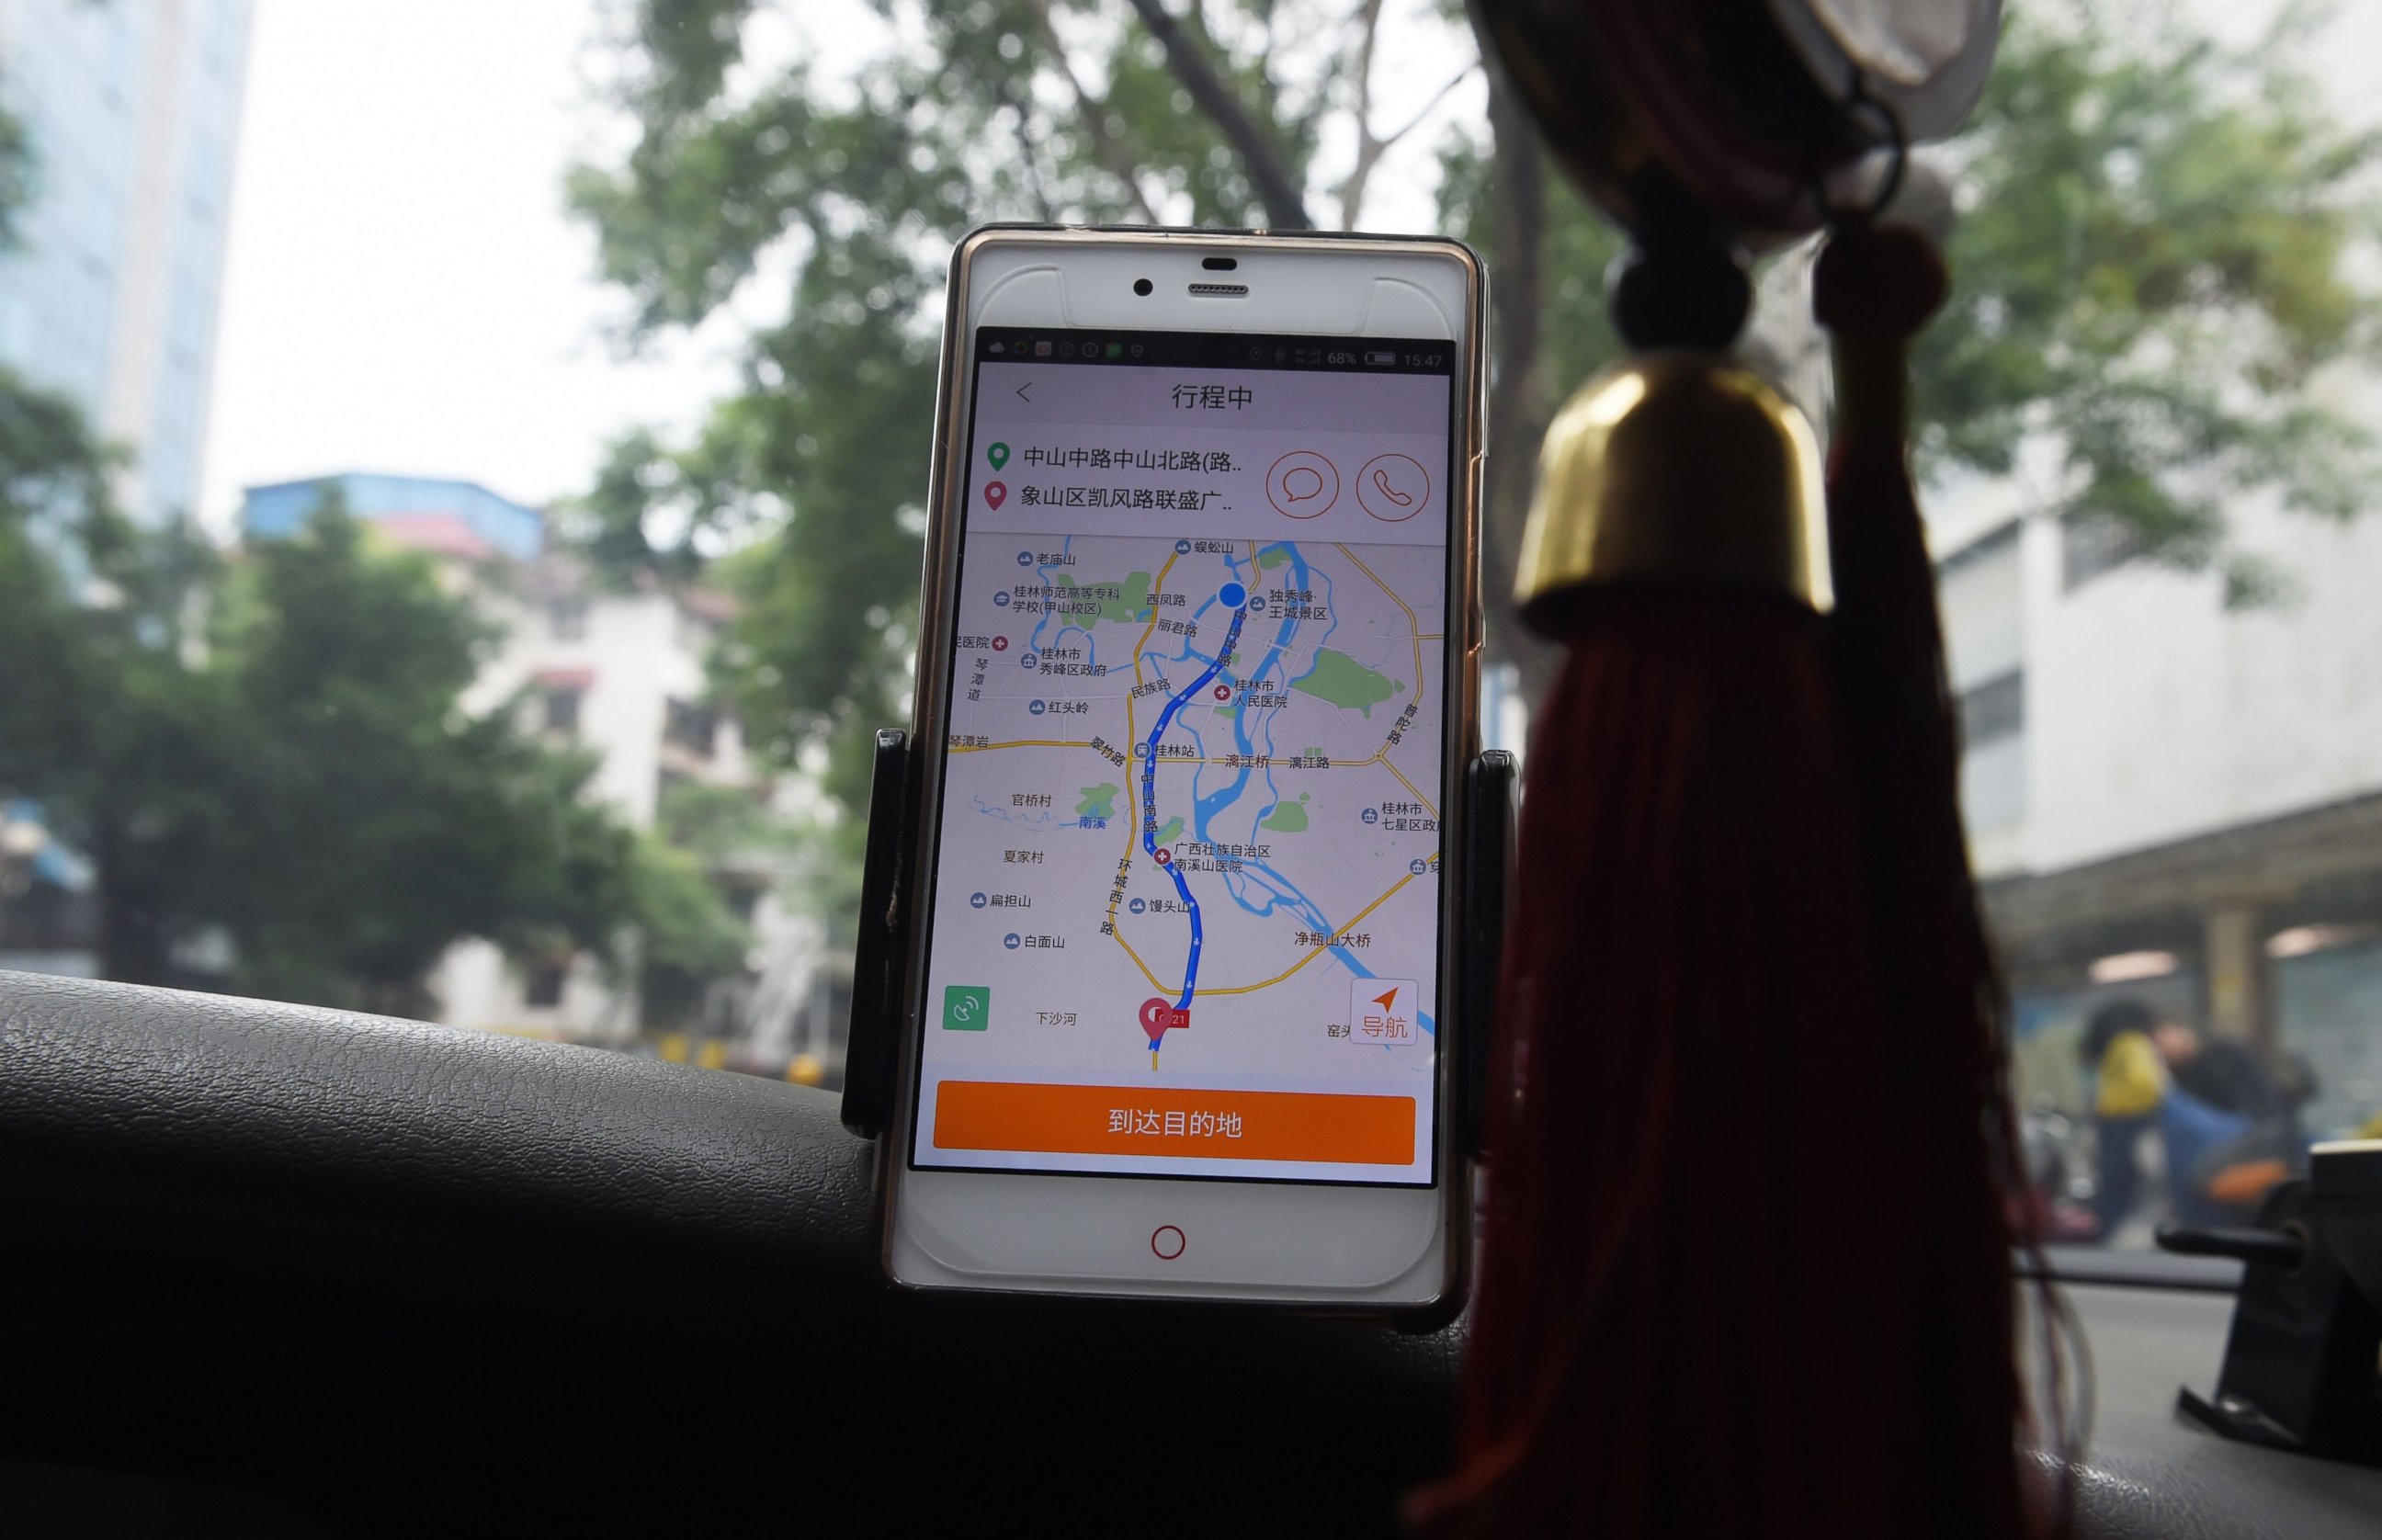 PHOTO: A taxi driver uses the Didi Chuxing app while driving along a street in Guilin, in China's southern Guangxi region on May 13, 2016.